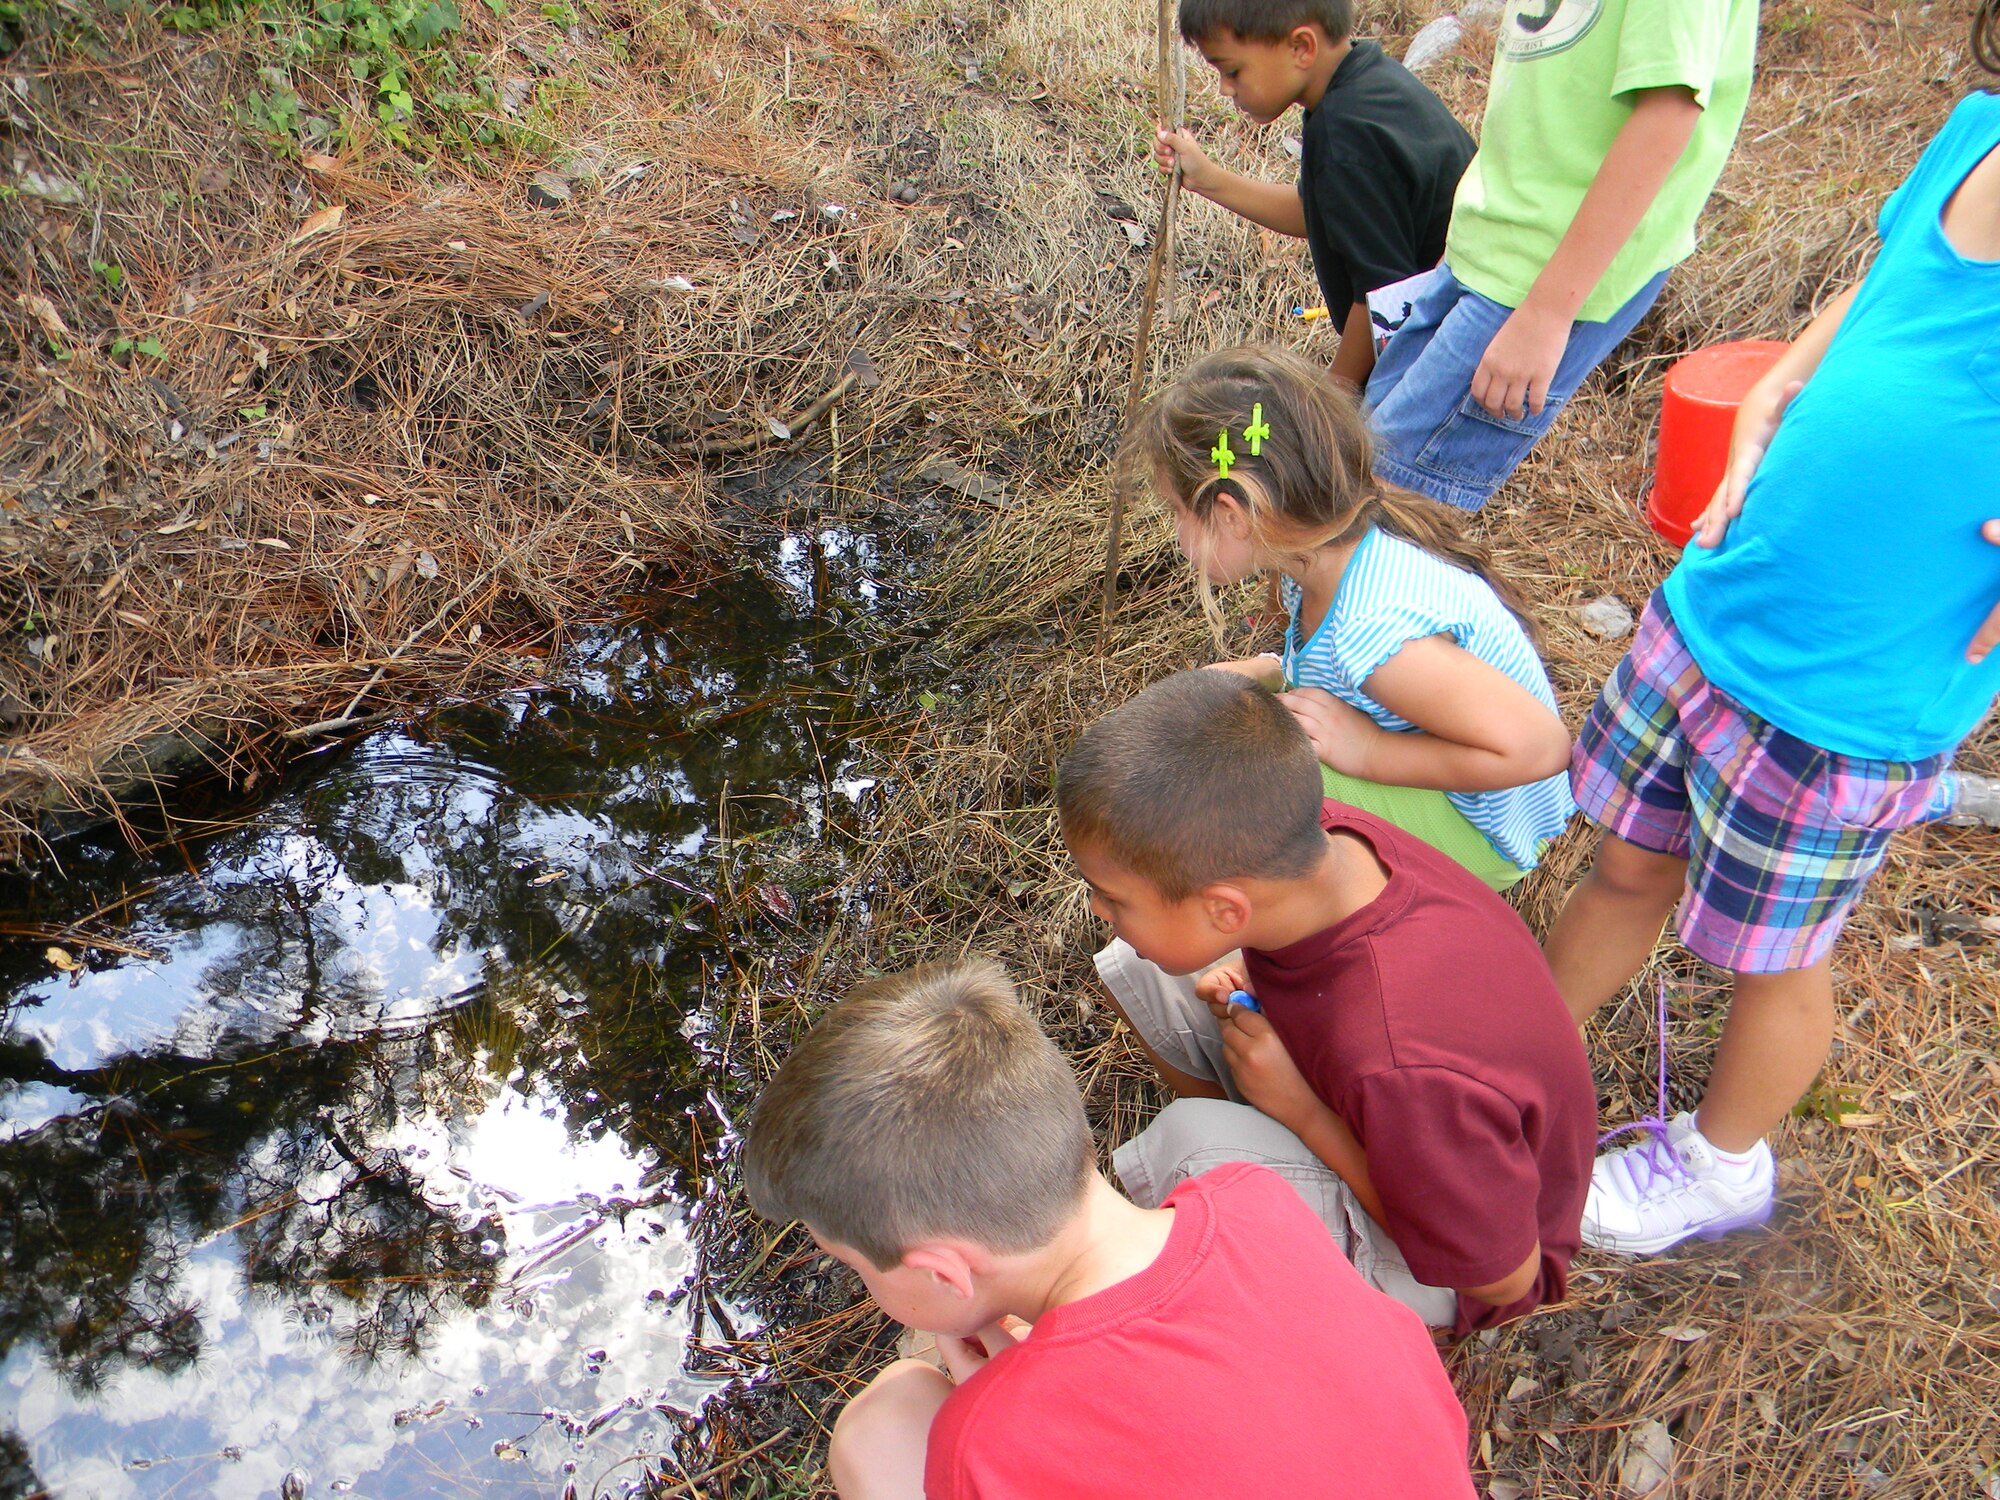 Children of the Child Development Center observe aquatic wildlife during the Hurlburt Field Youth Center Wetland Stream Project at Hurlburt Field, Fla.  The outdoor activities allowed children to learn about the local ecosystem and wildlife.  (Courtesy photo by Catherine Goss)